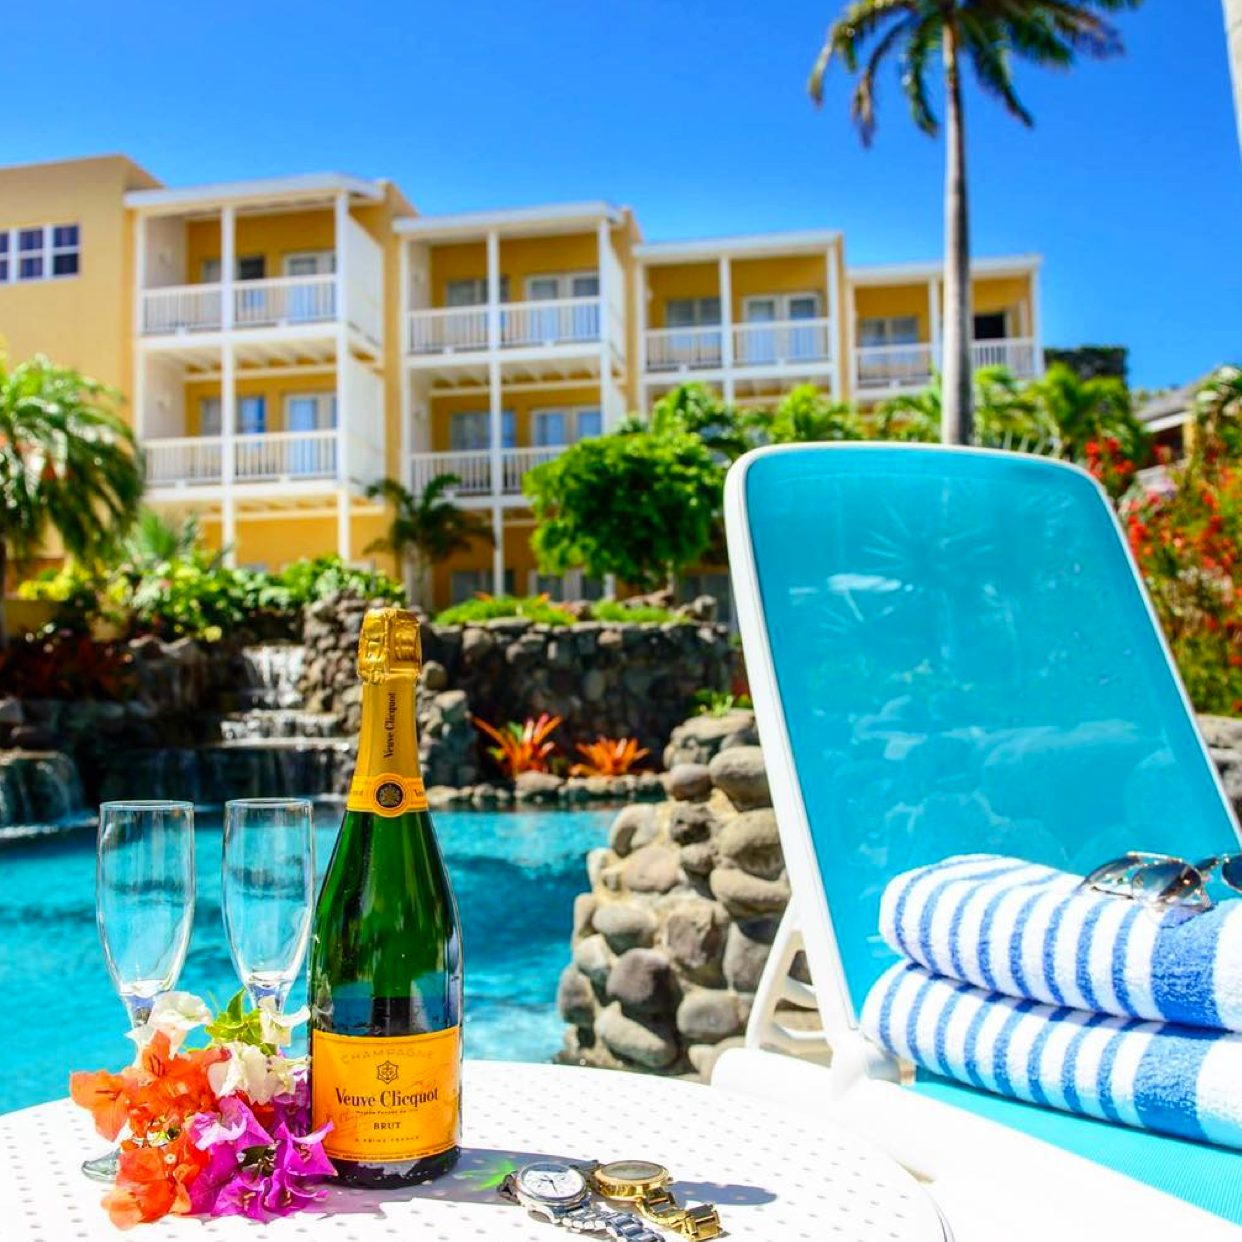 Veuve Clicquot's Bubbles on the Beach, St. Kitts